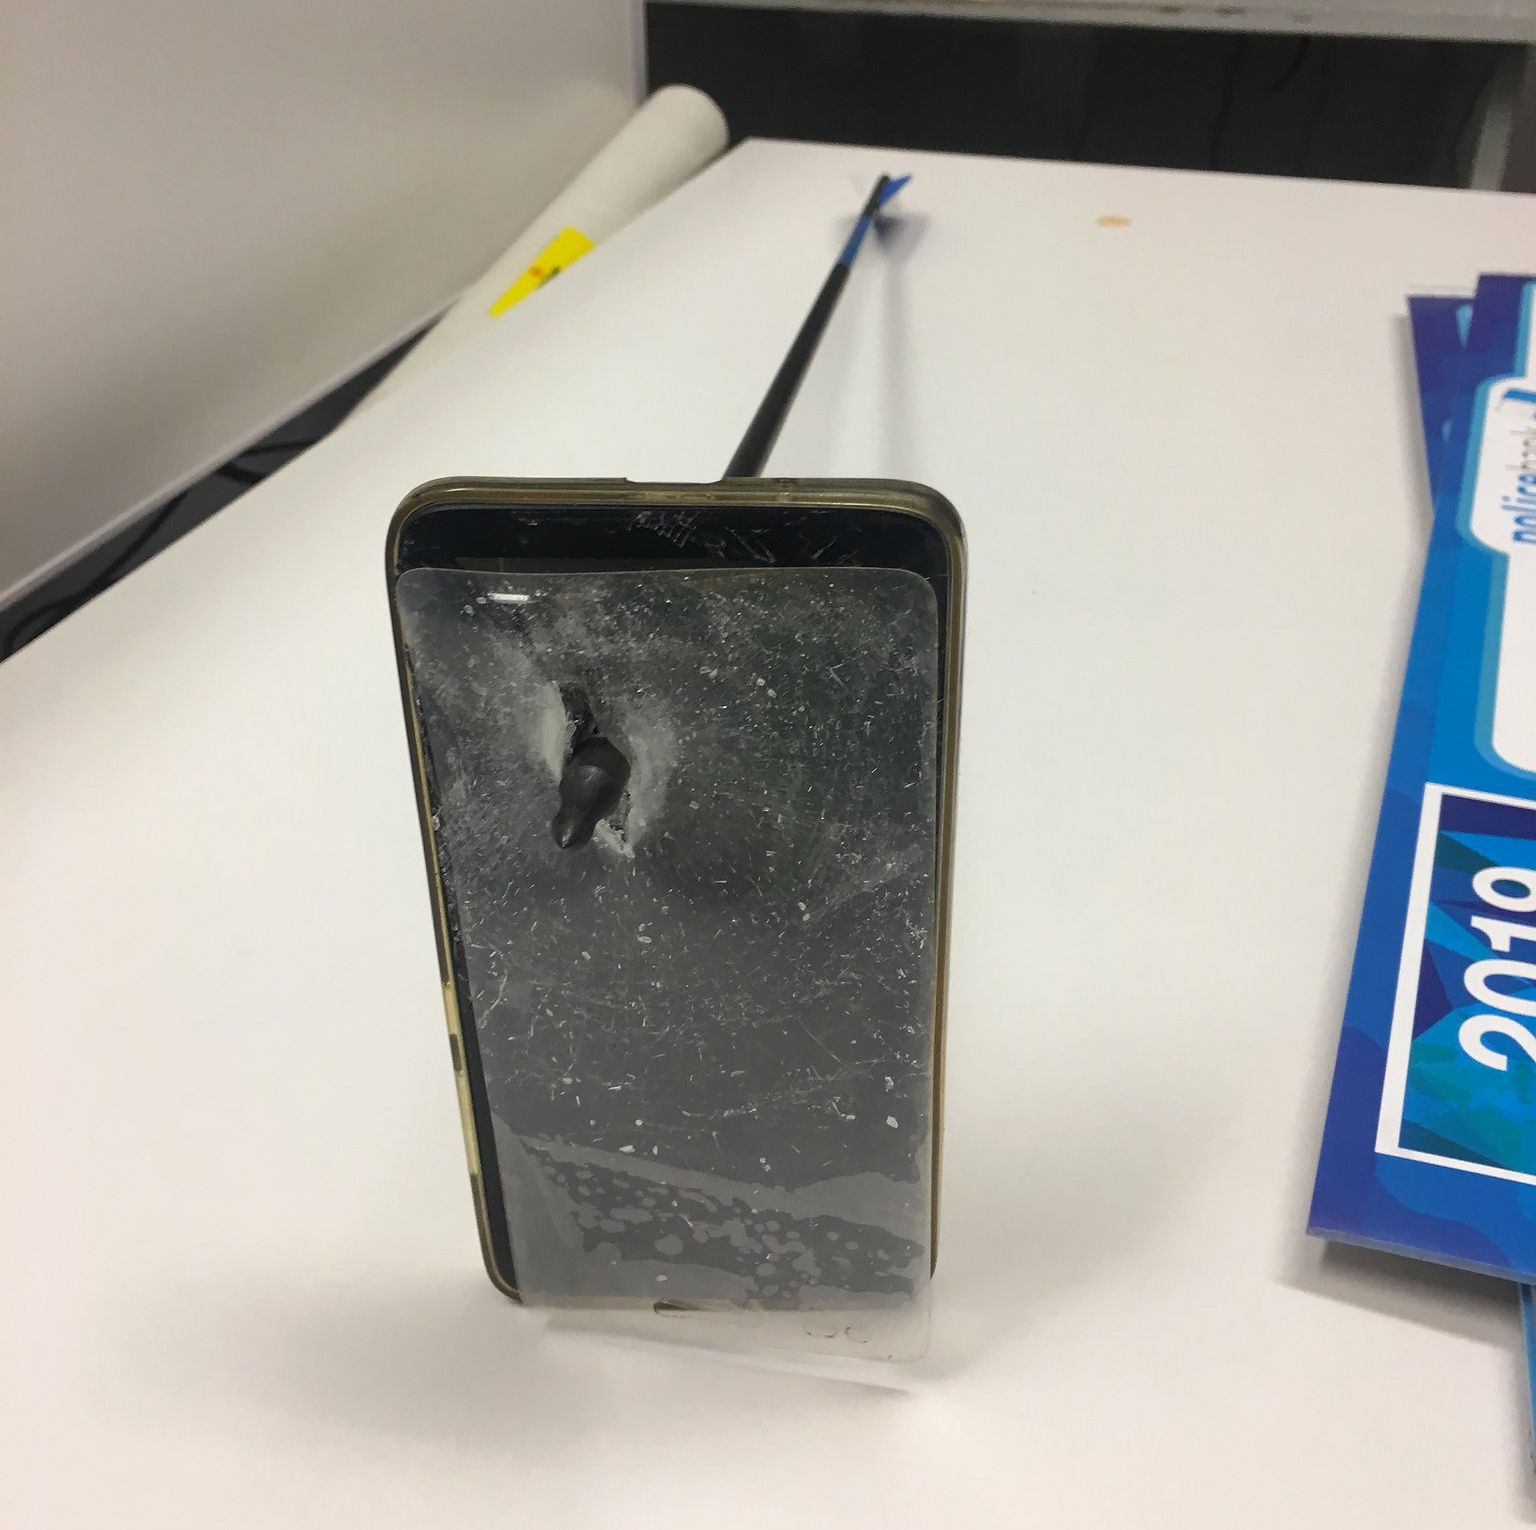 Smartphone: 1, arrow: 0, or how a phone saved a man's life from a crazy bowman